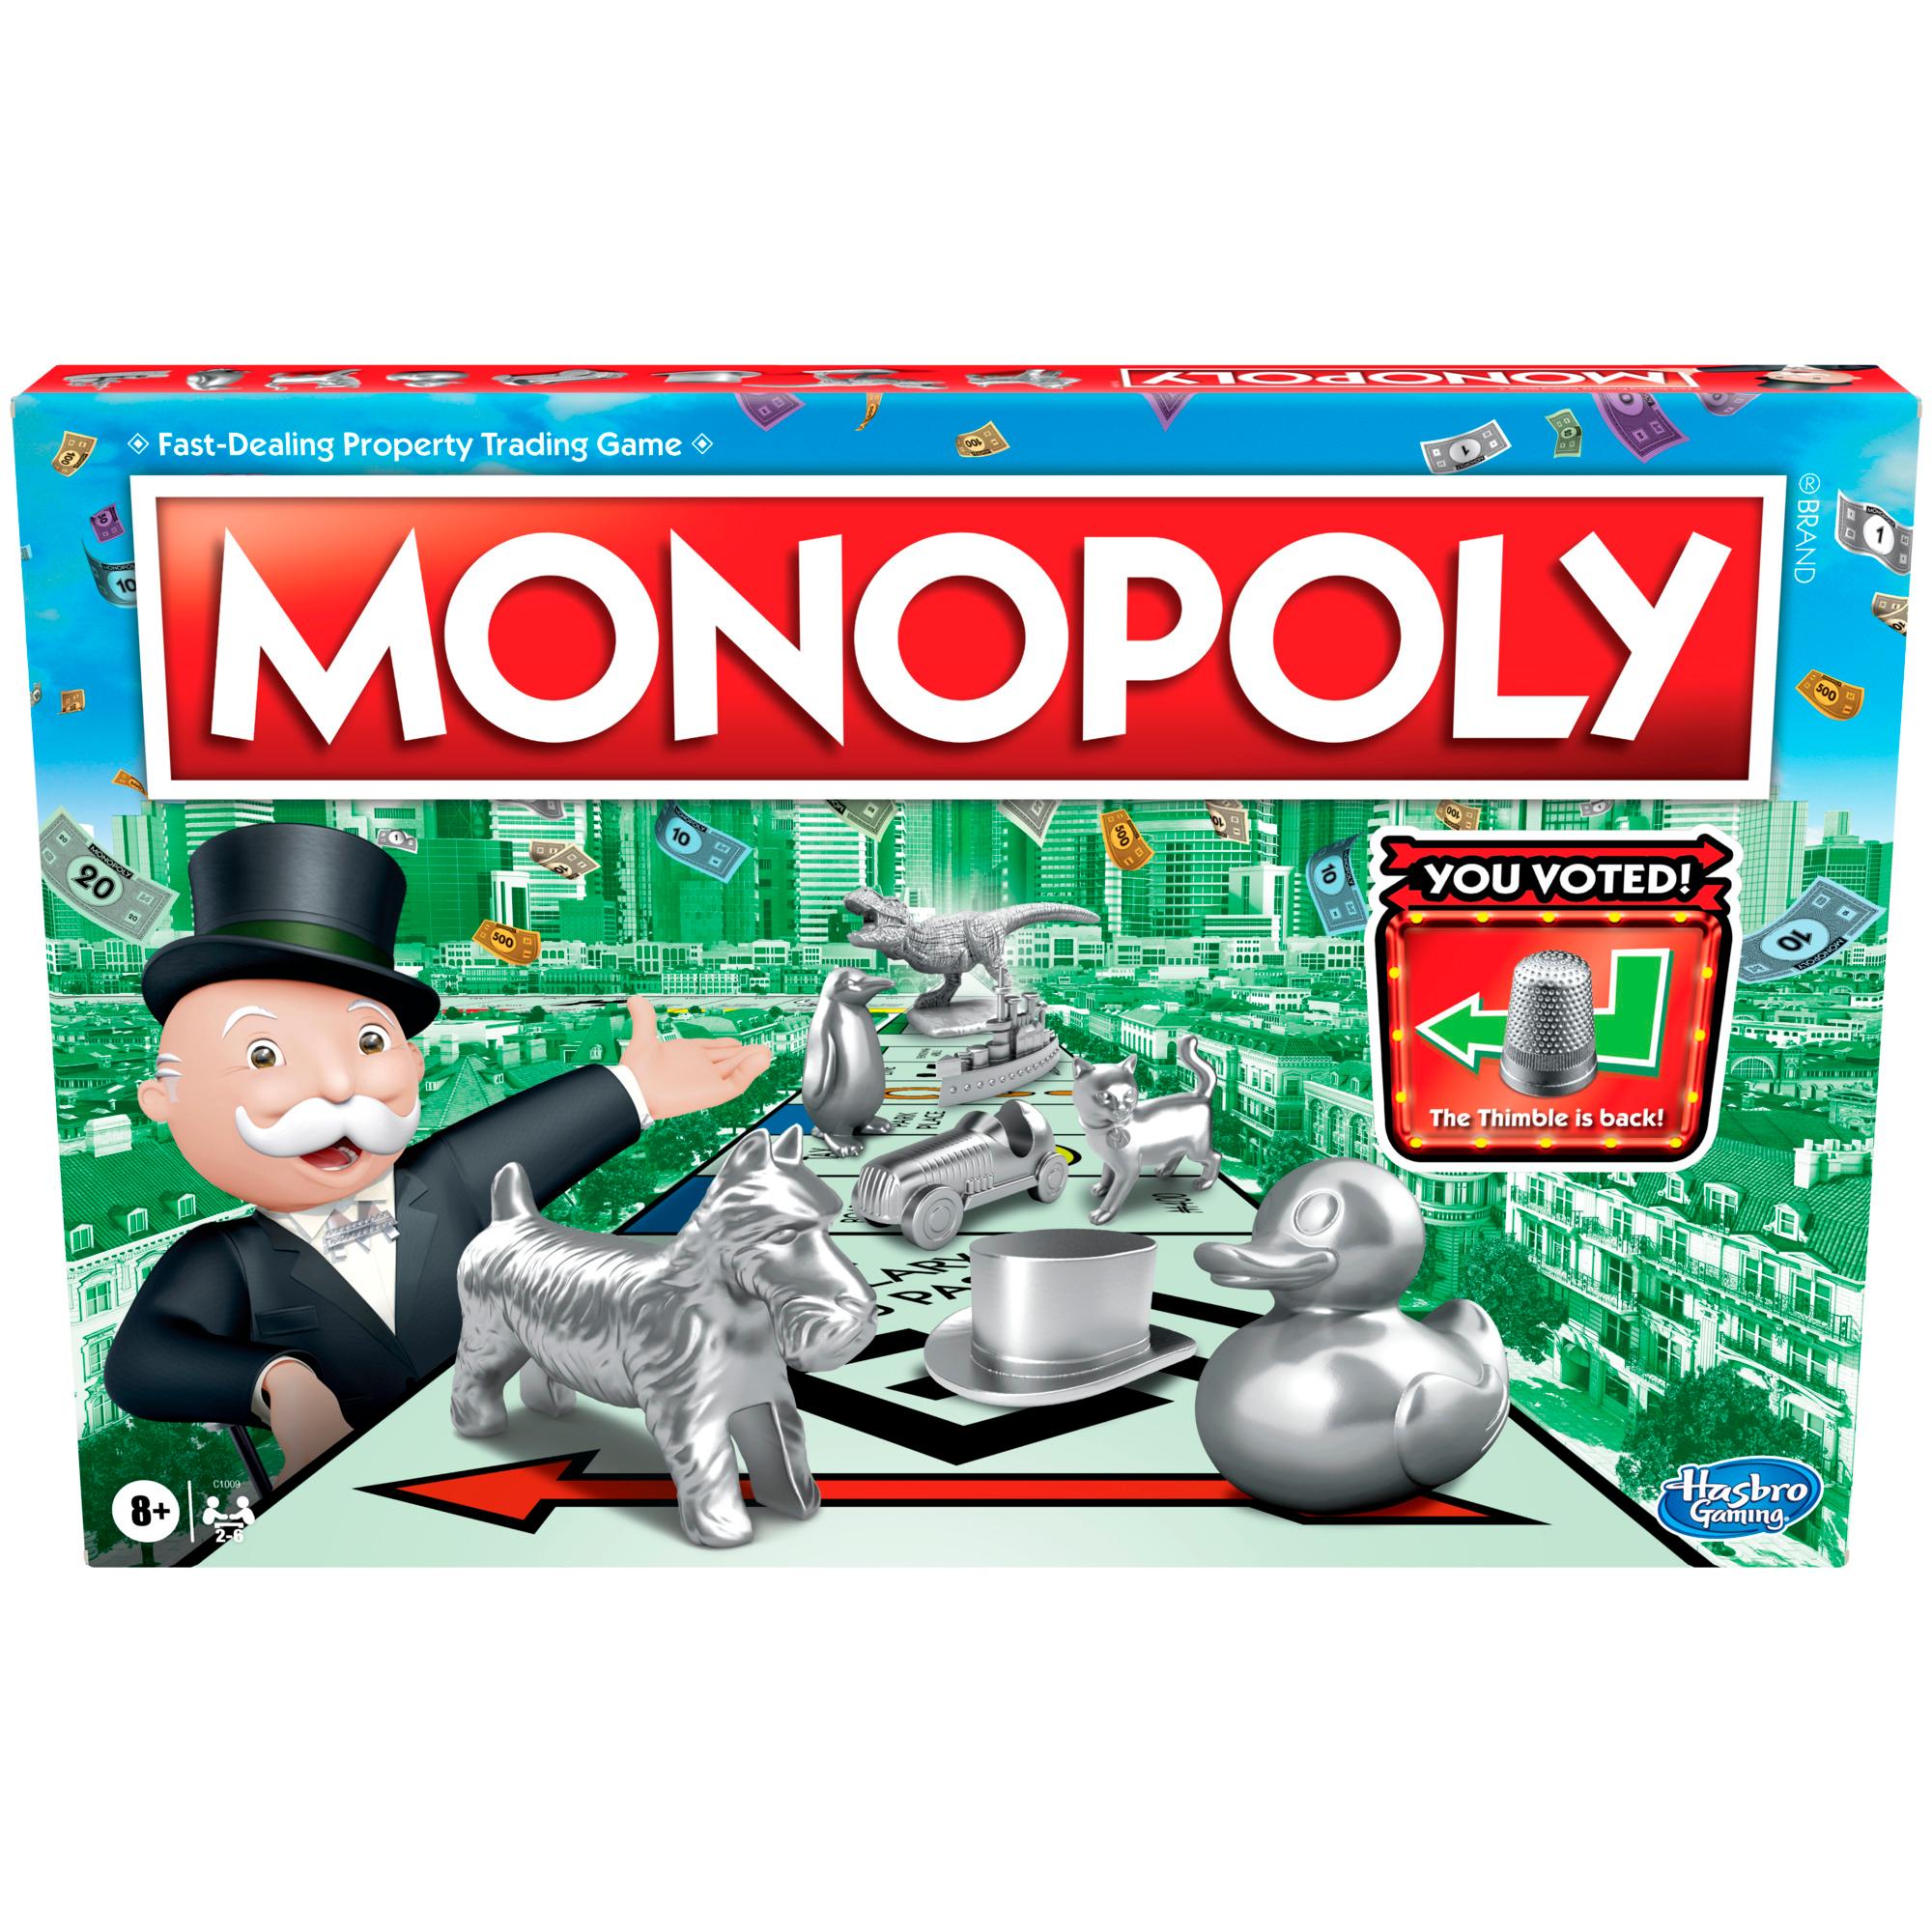 Monopoly Board Game for Ages 8+, For 2-6 Players, Includes 8 Tokens (Tokens May Vary)